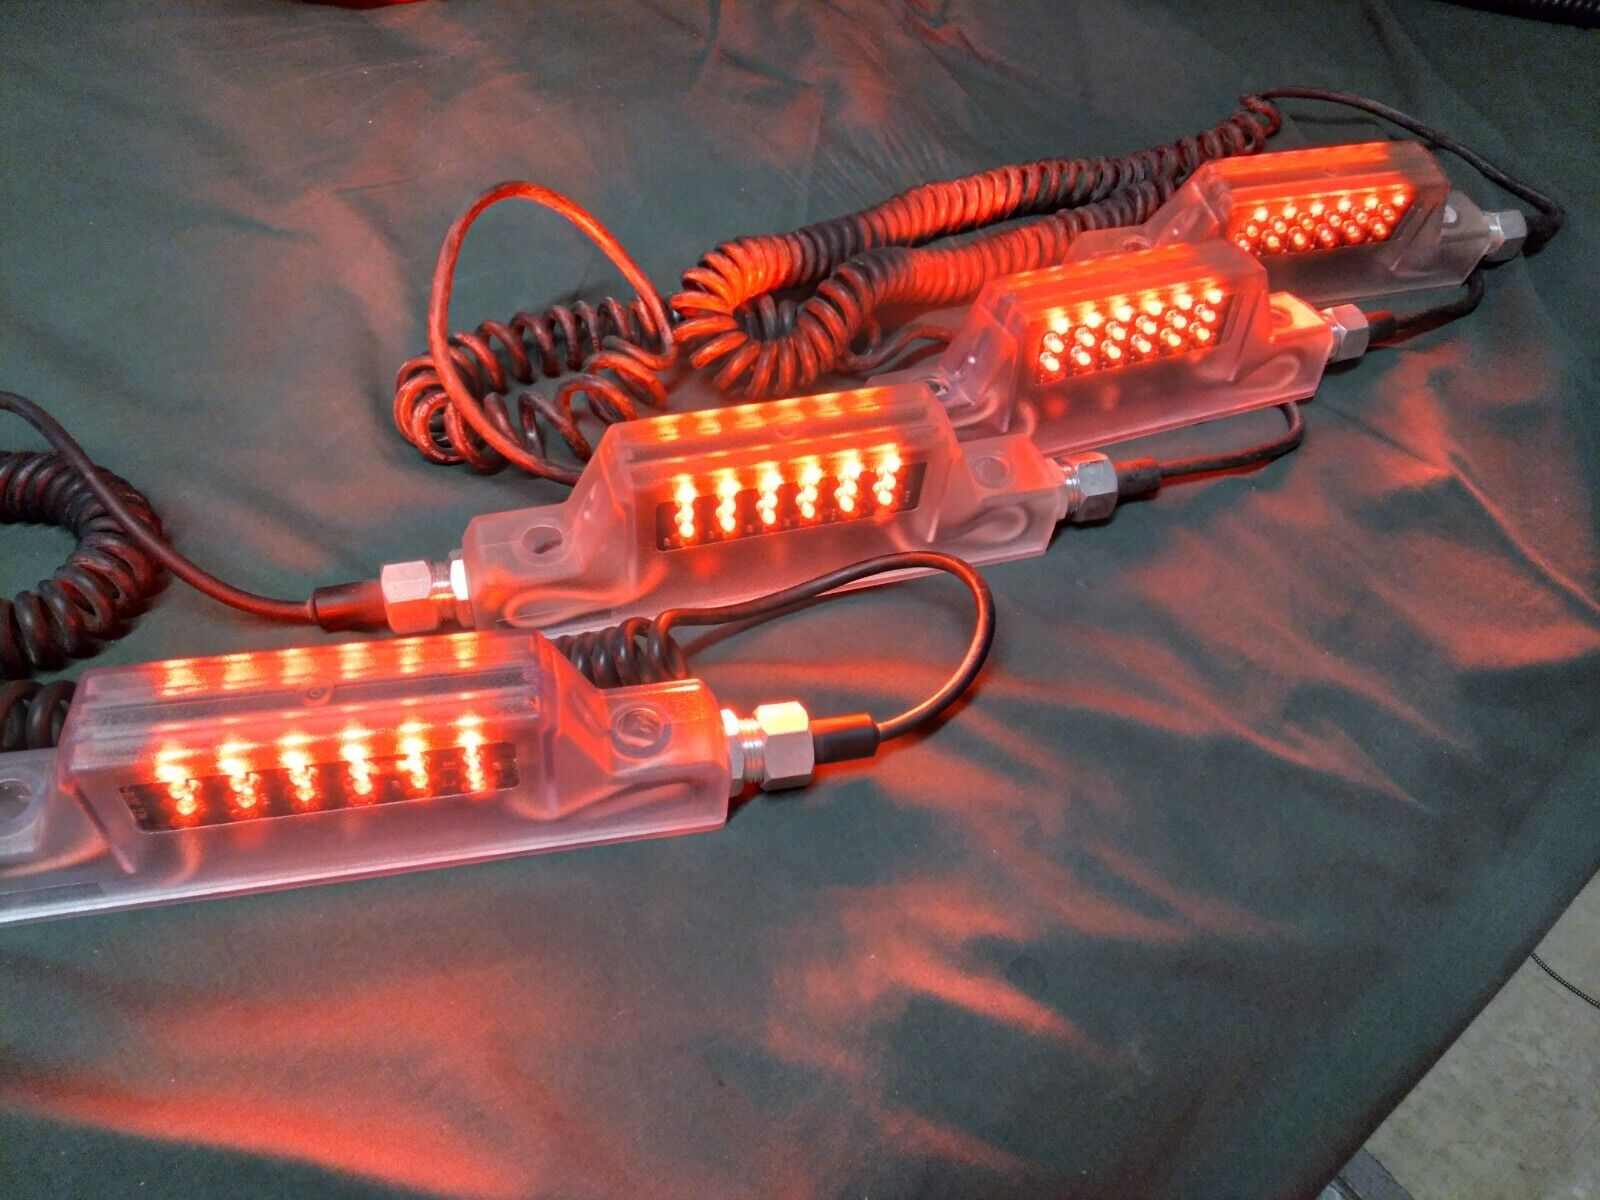 Qty 1 Natl Electric Gate Co Railroad Xing Red LED Light for Base or Mid. of Gate